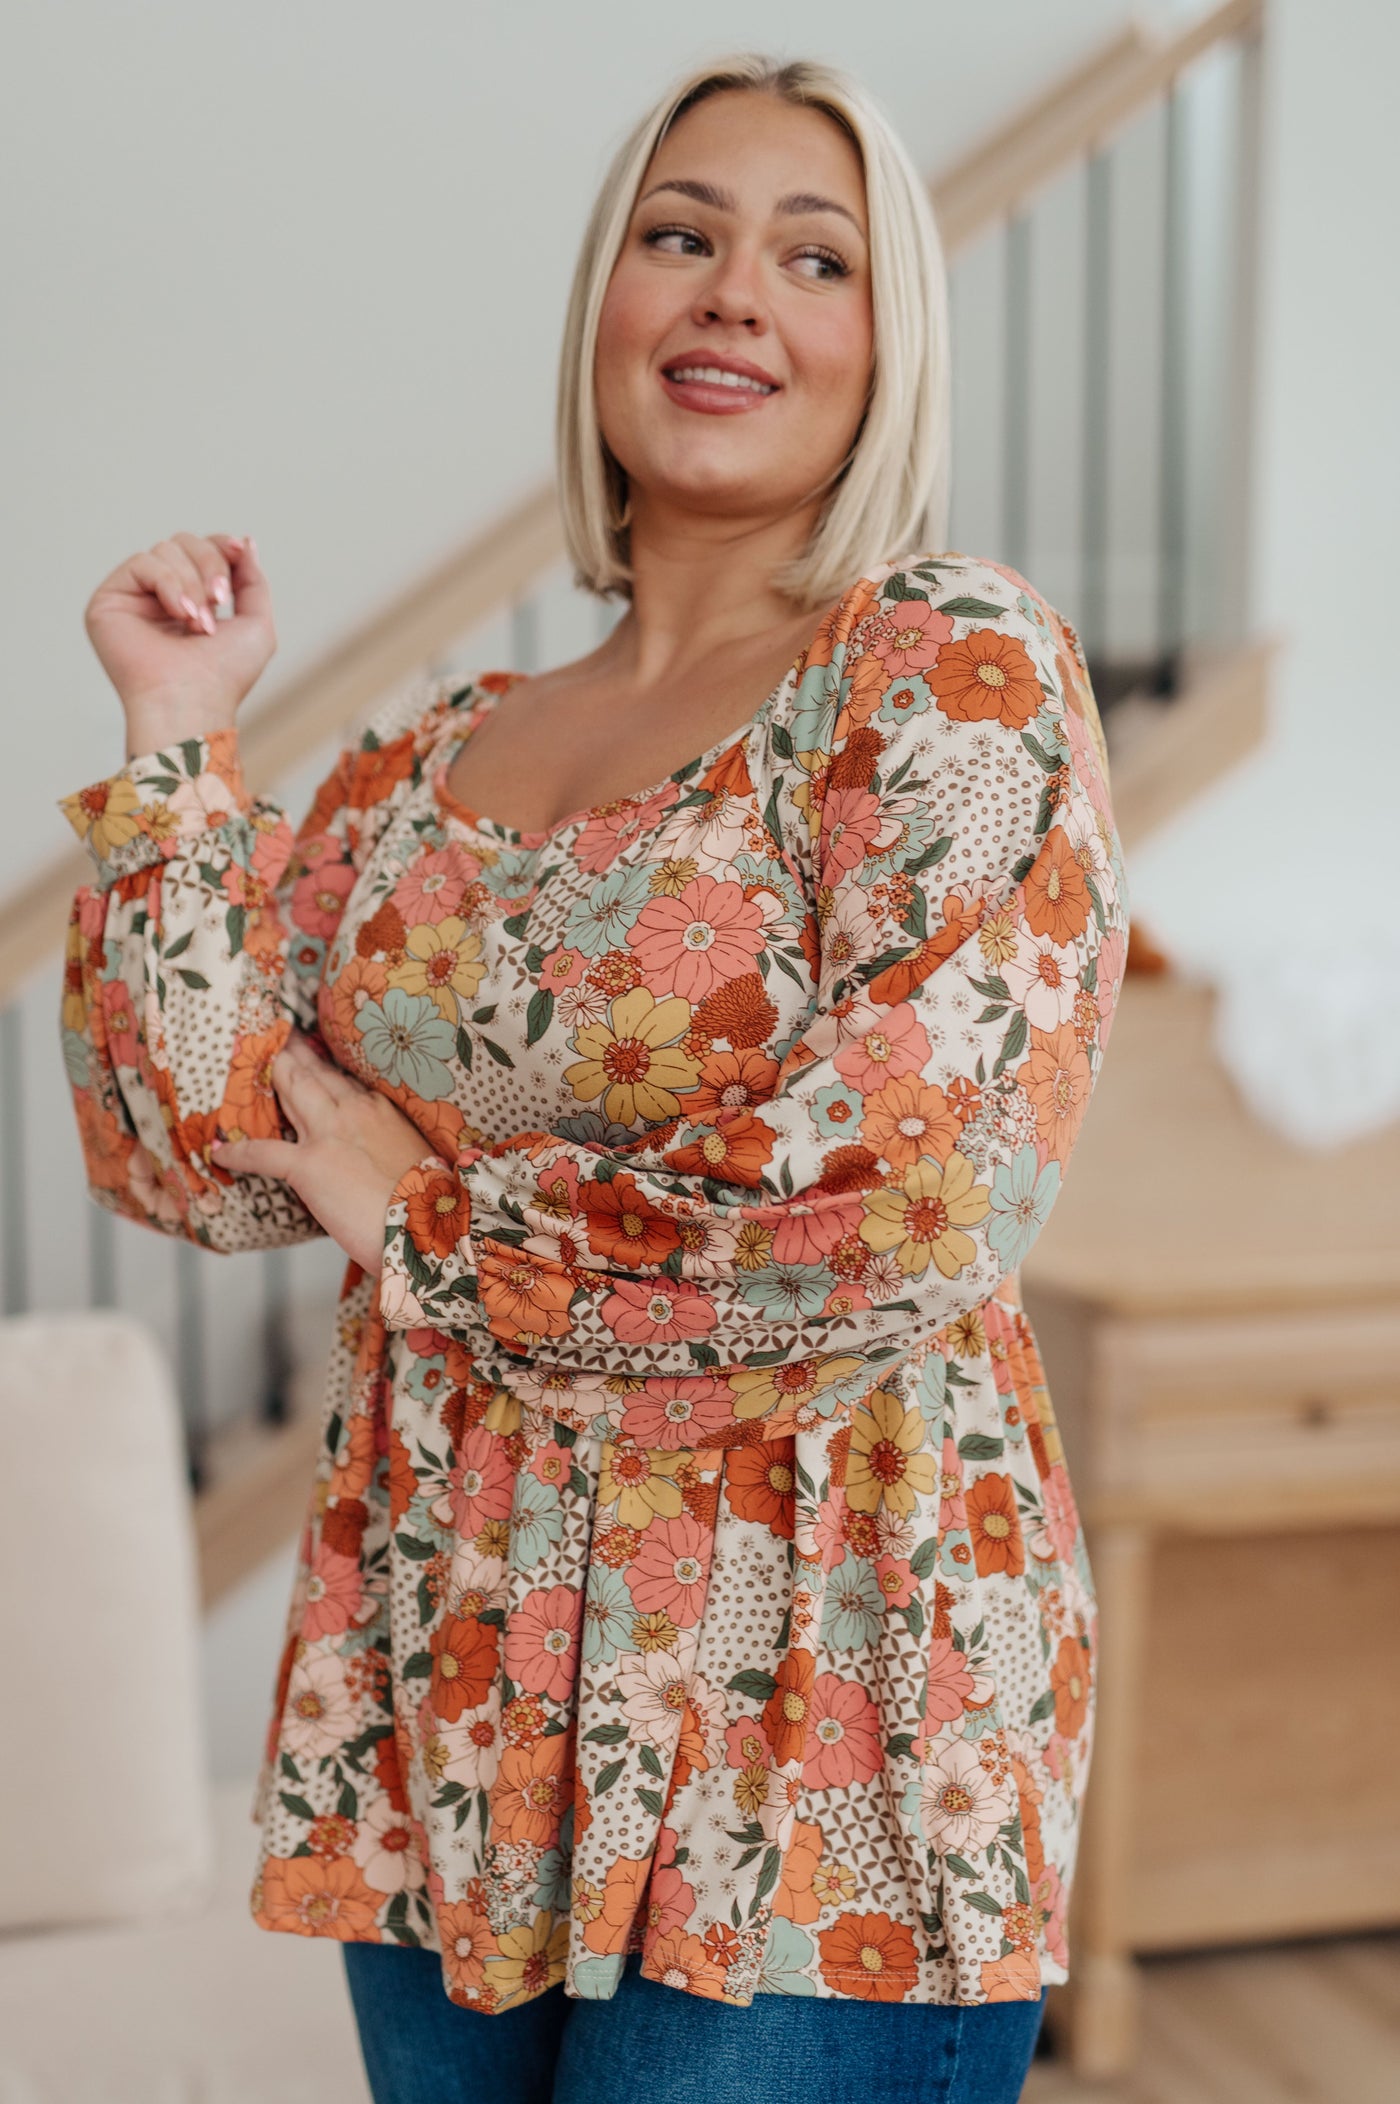 Look effortlessly stylish in our Fall For Florals Babydoll Top. This sweet, feminine style features a mixed-print floral pattern, buttery-soft fabric and balloon sleeves for a comfortable and flattering look